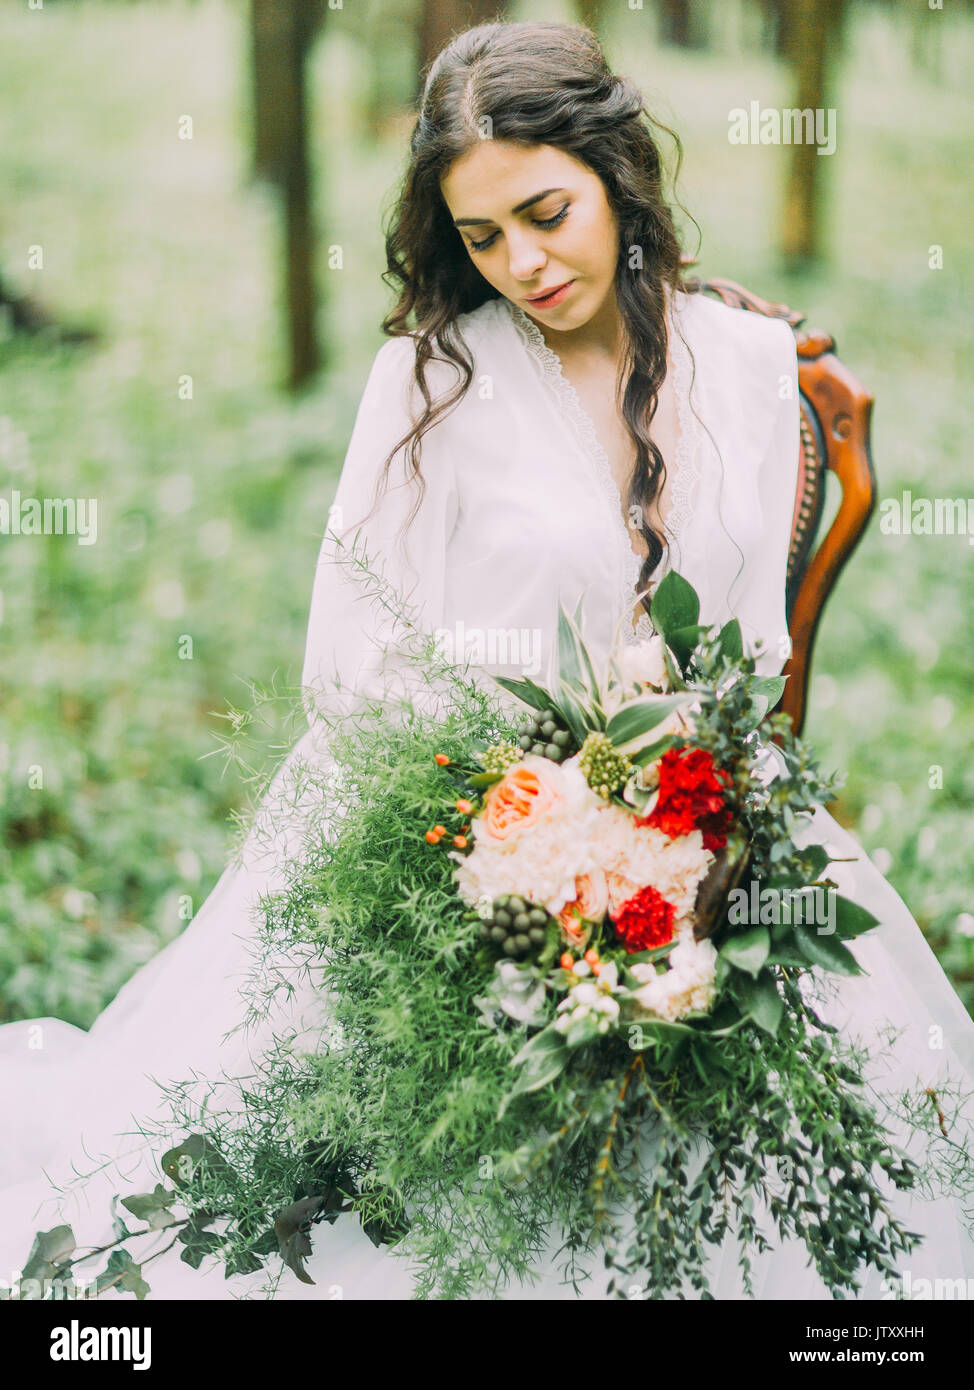 The portrait of the woman with the brown hair in the white long wedding dress sitting on the chair and holding at looking at the huge bouquet of red and white flowers in the forest. Stock Photo